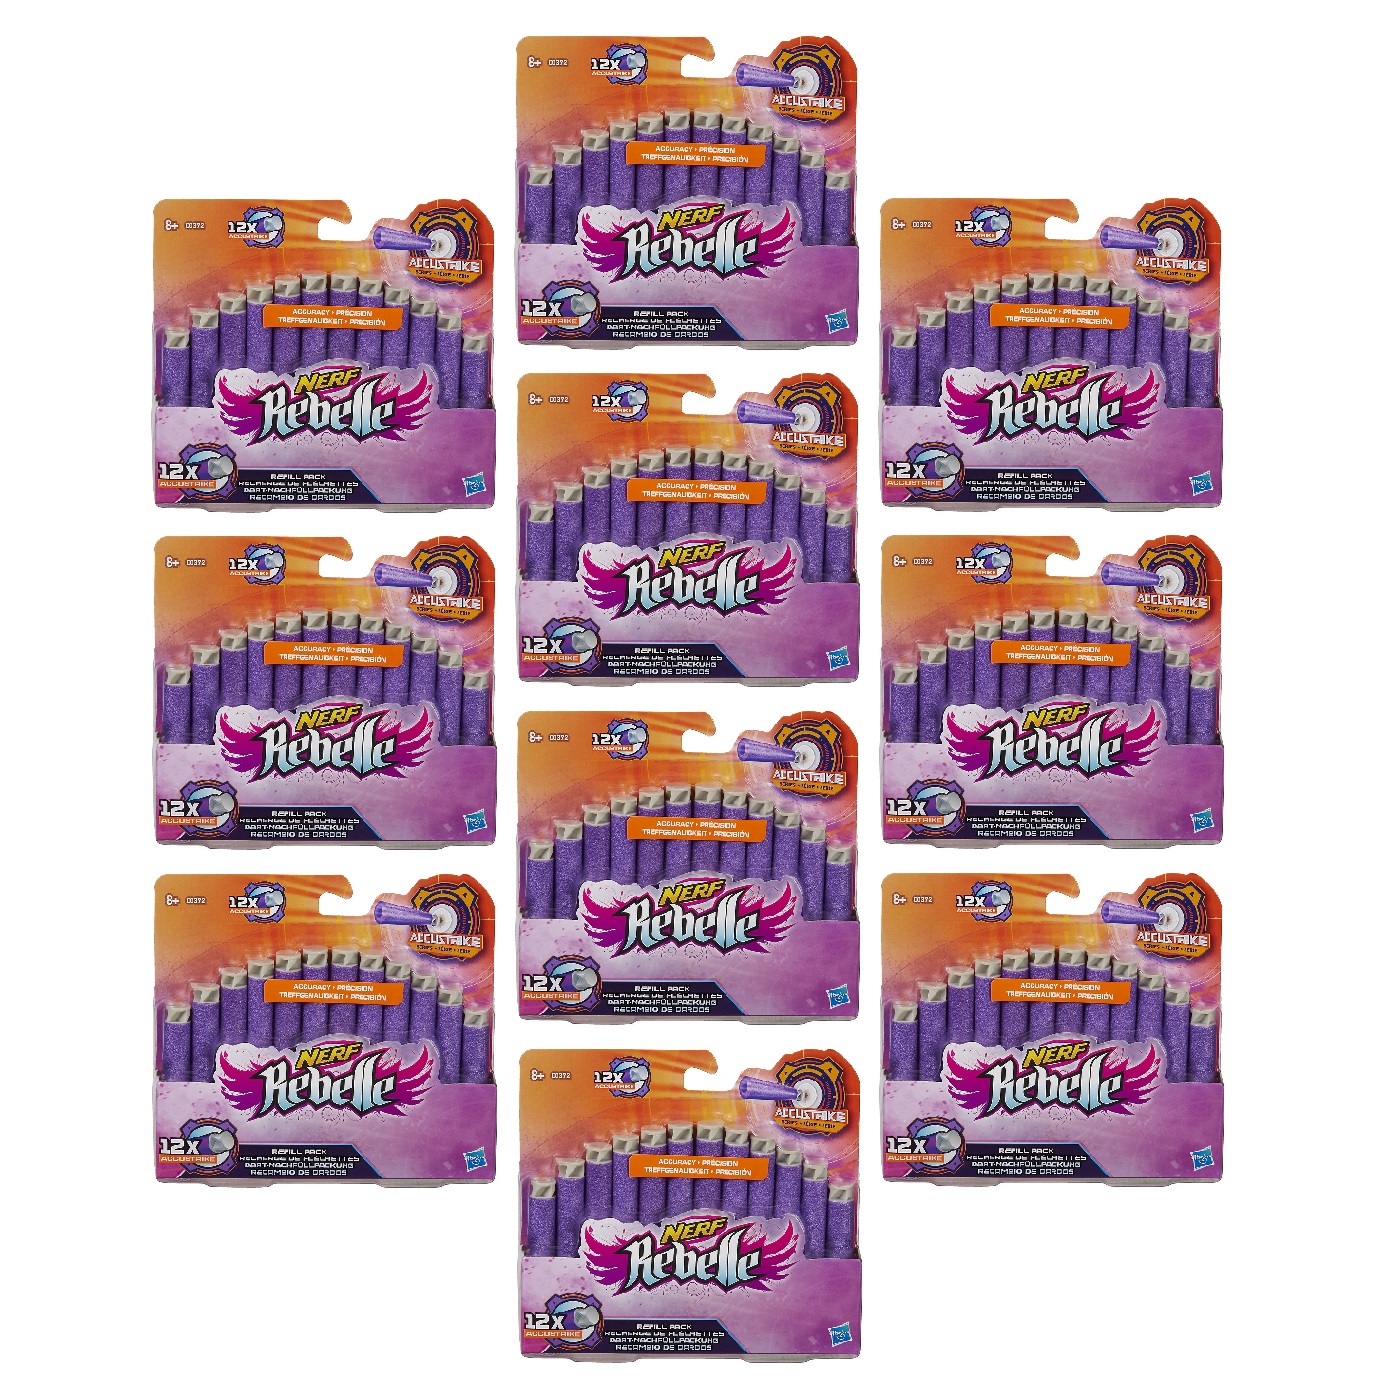 64 Darts Total NEW Nerf Rebelle Message Darts 8 Count Pack Case of 8 Packages